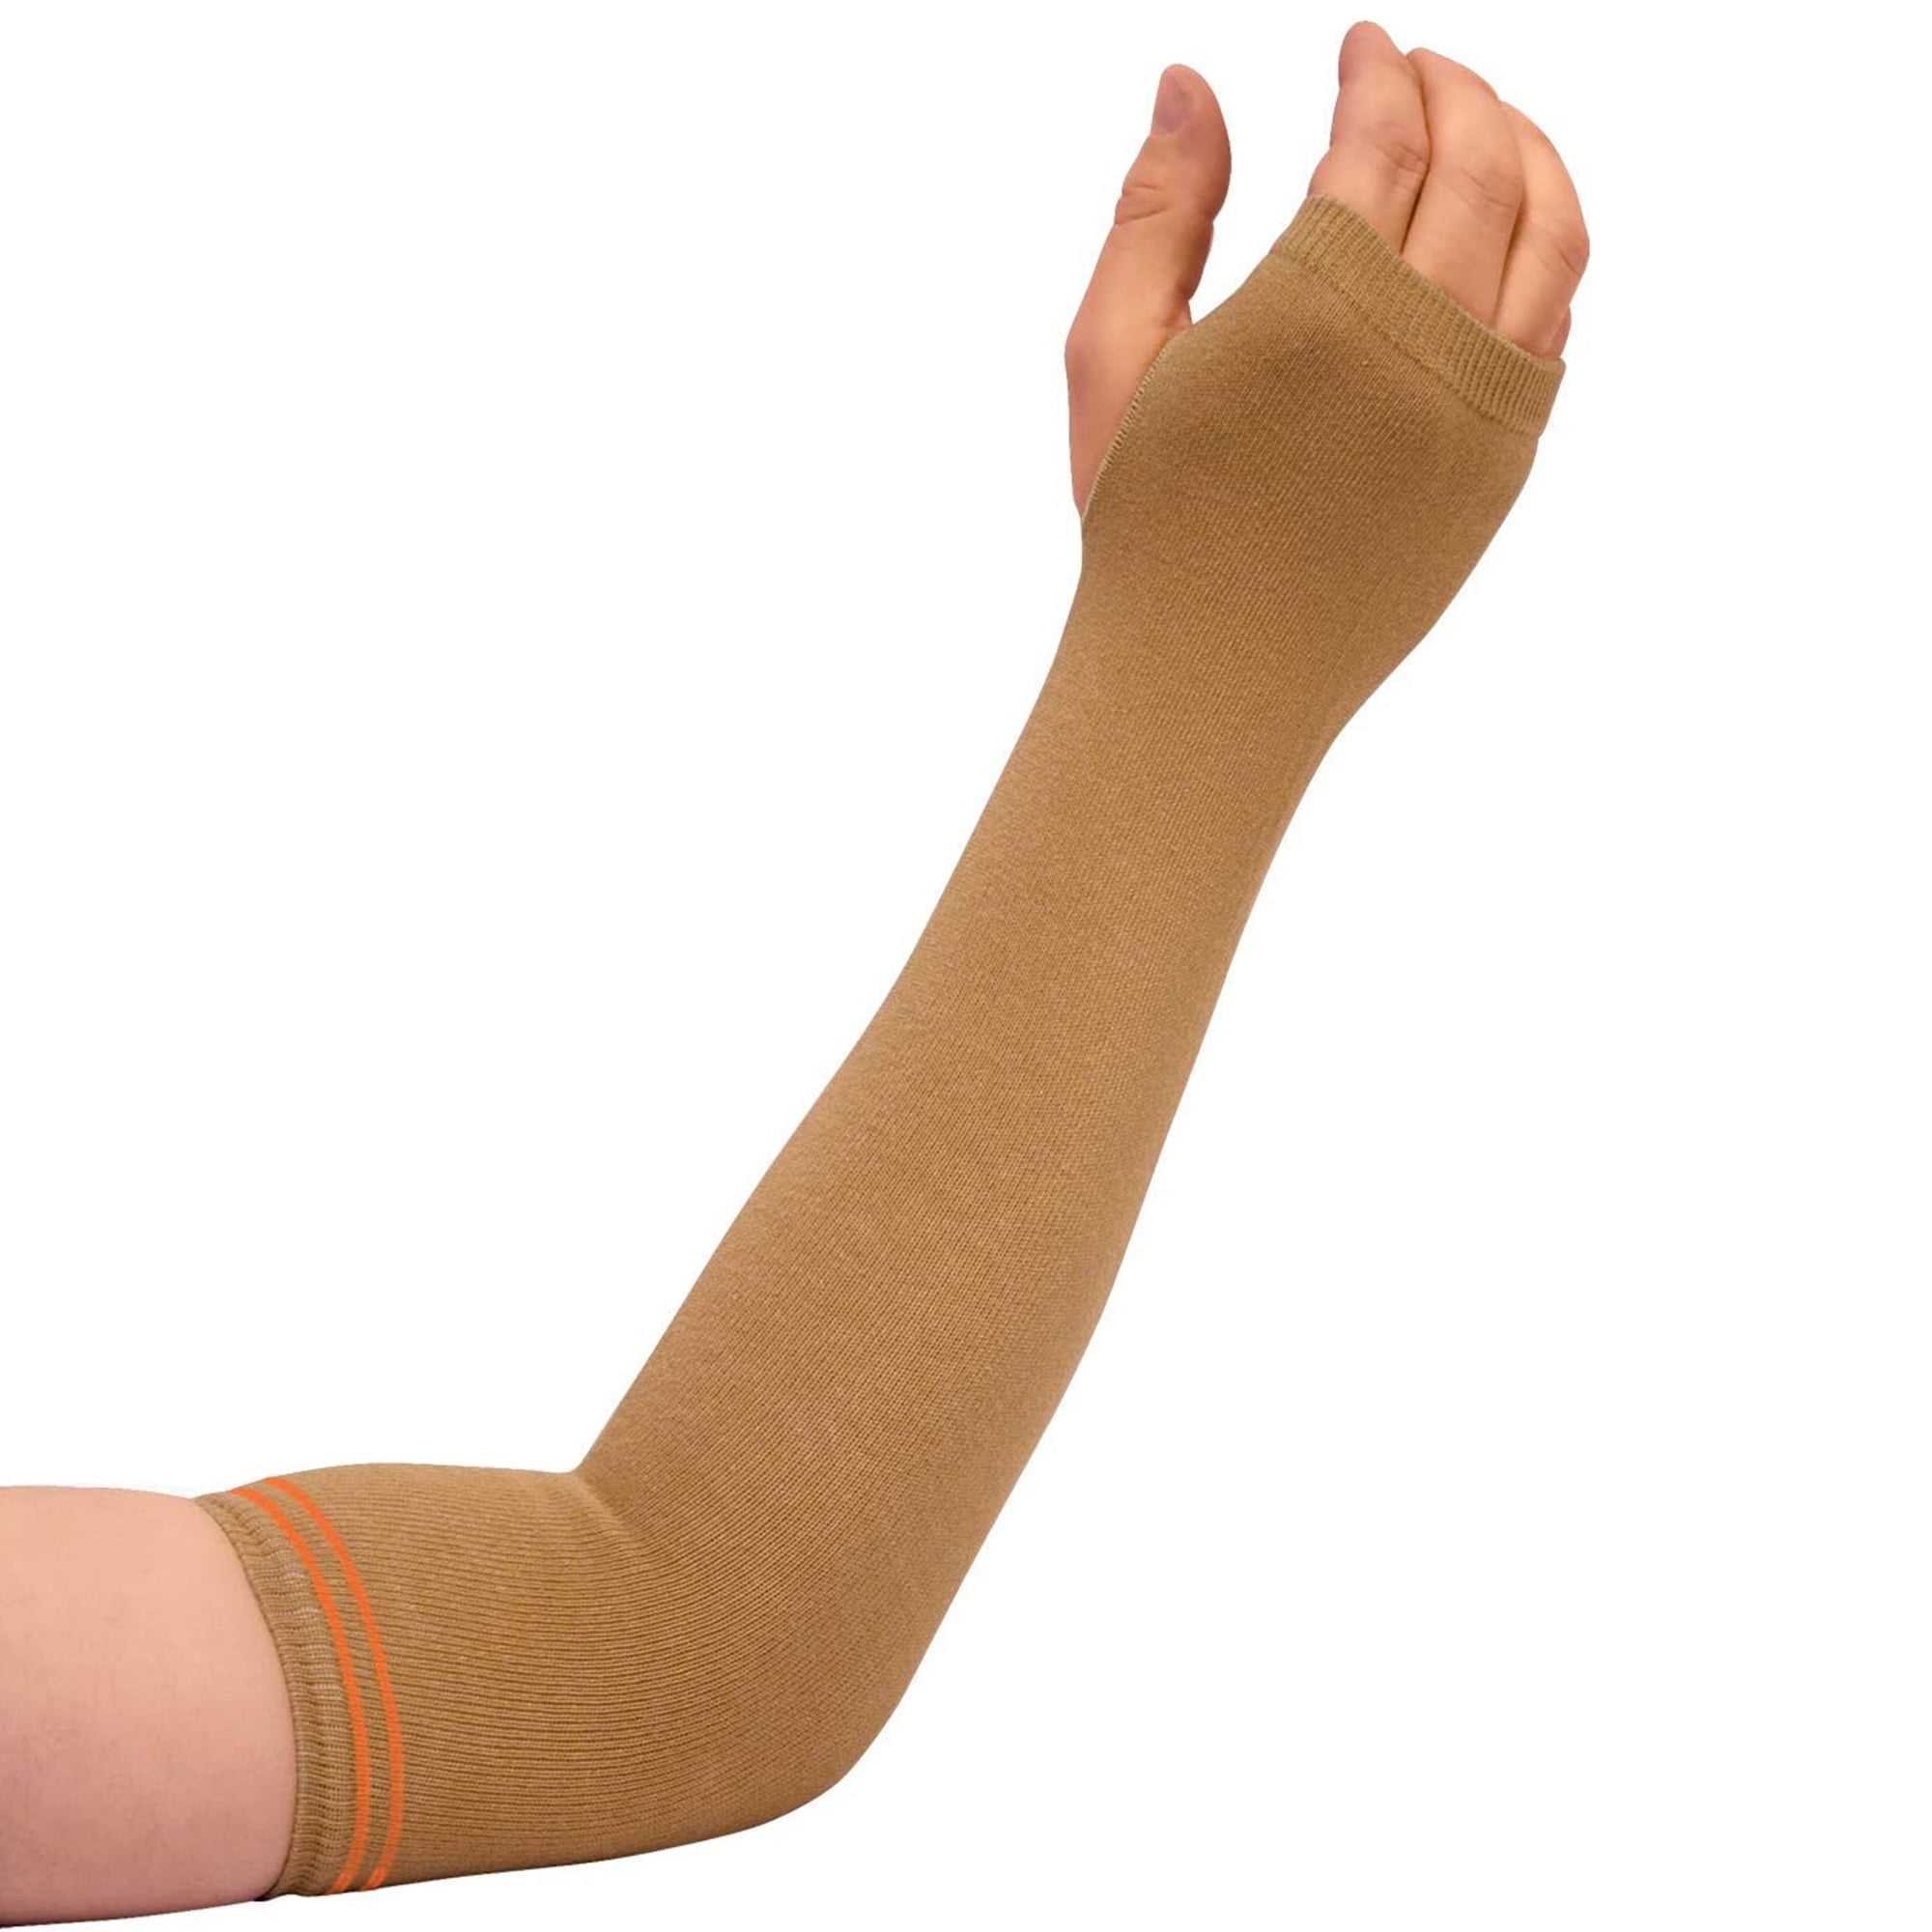 Compression Arm Sleeves Lymphedema